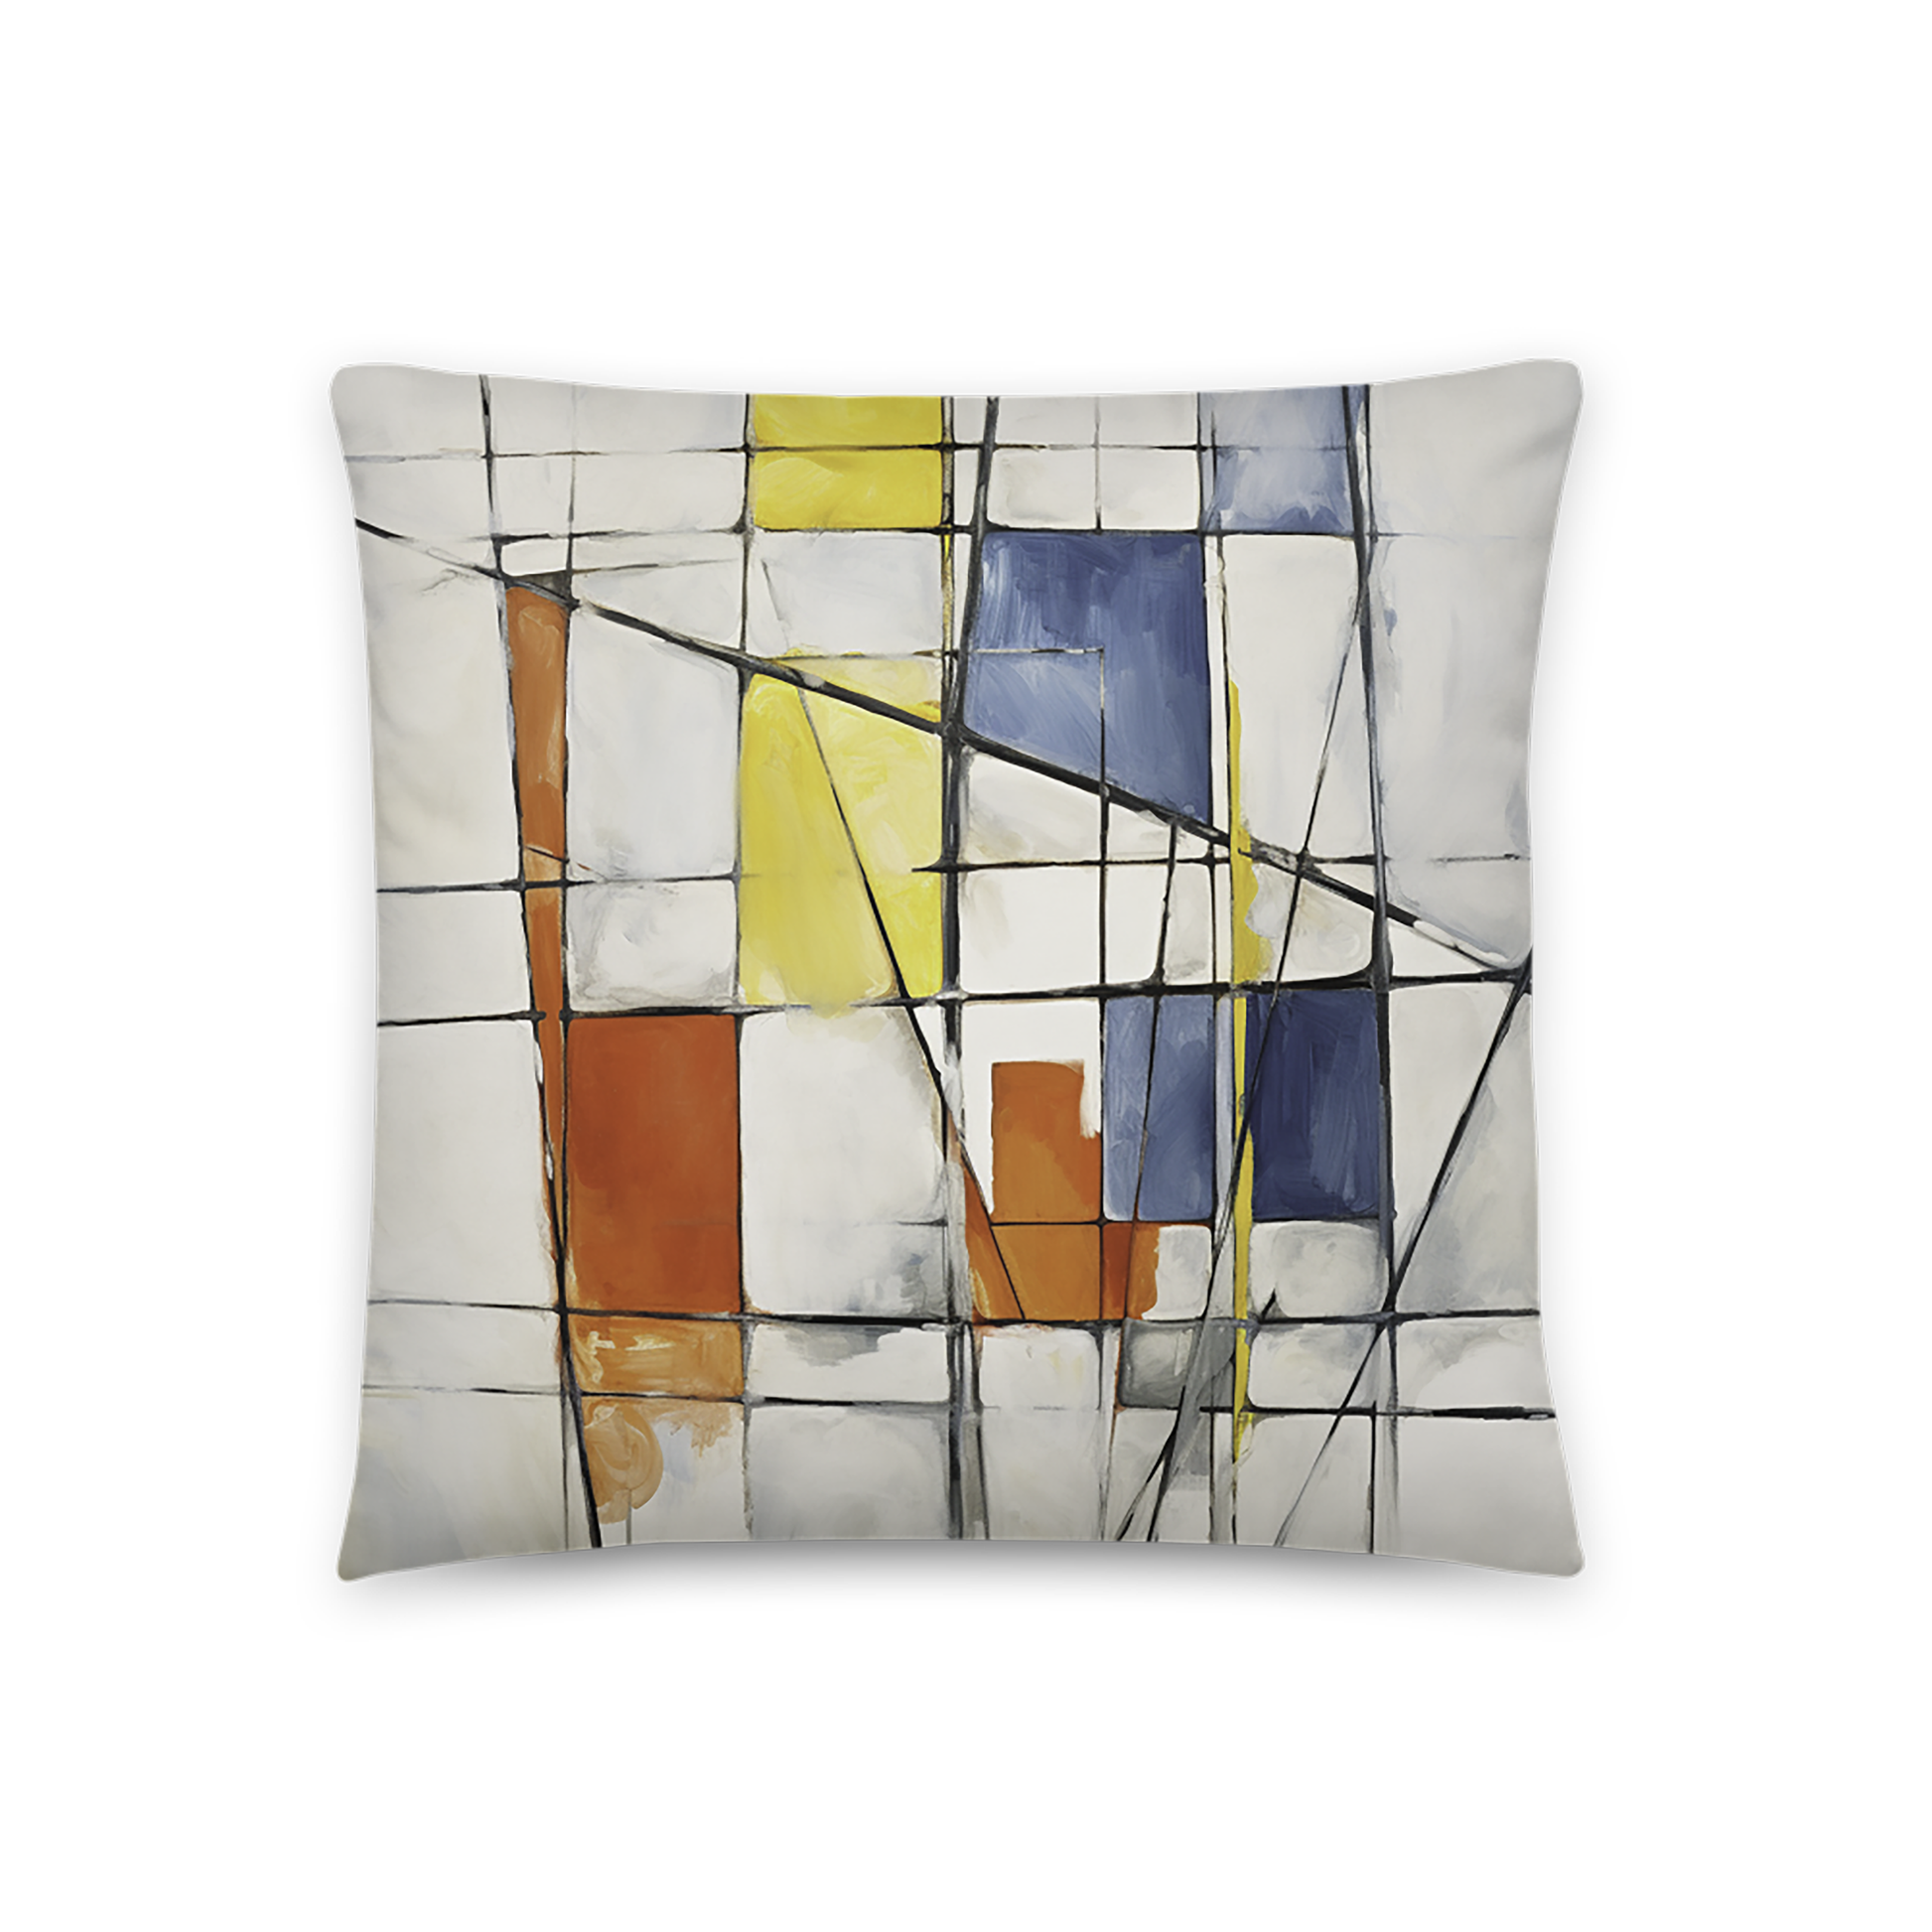 ABSTRACTIONS - PEARL TOSS PILLOW, 18x18